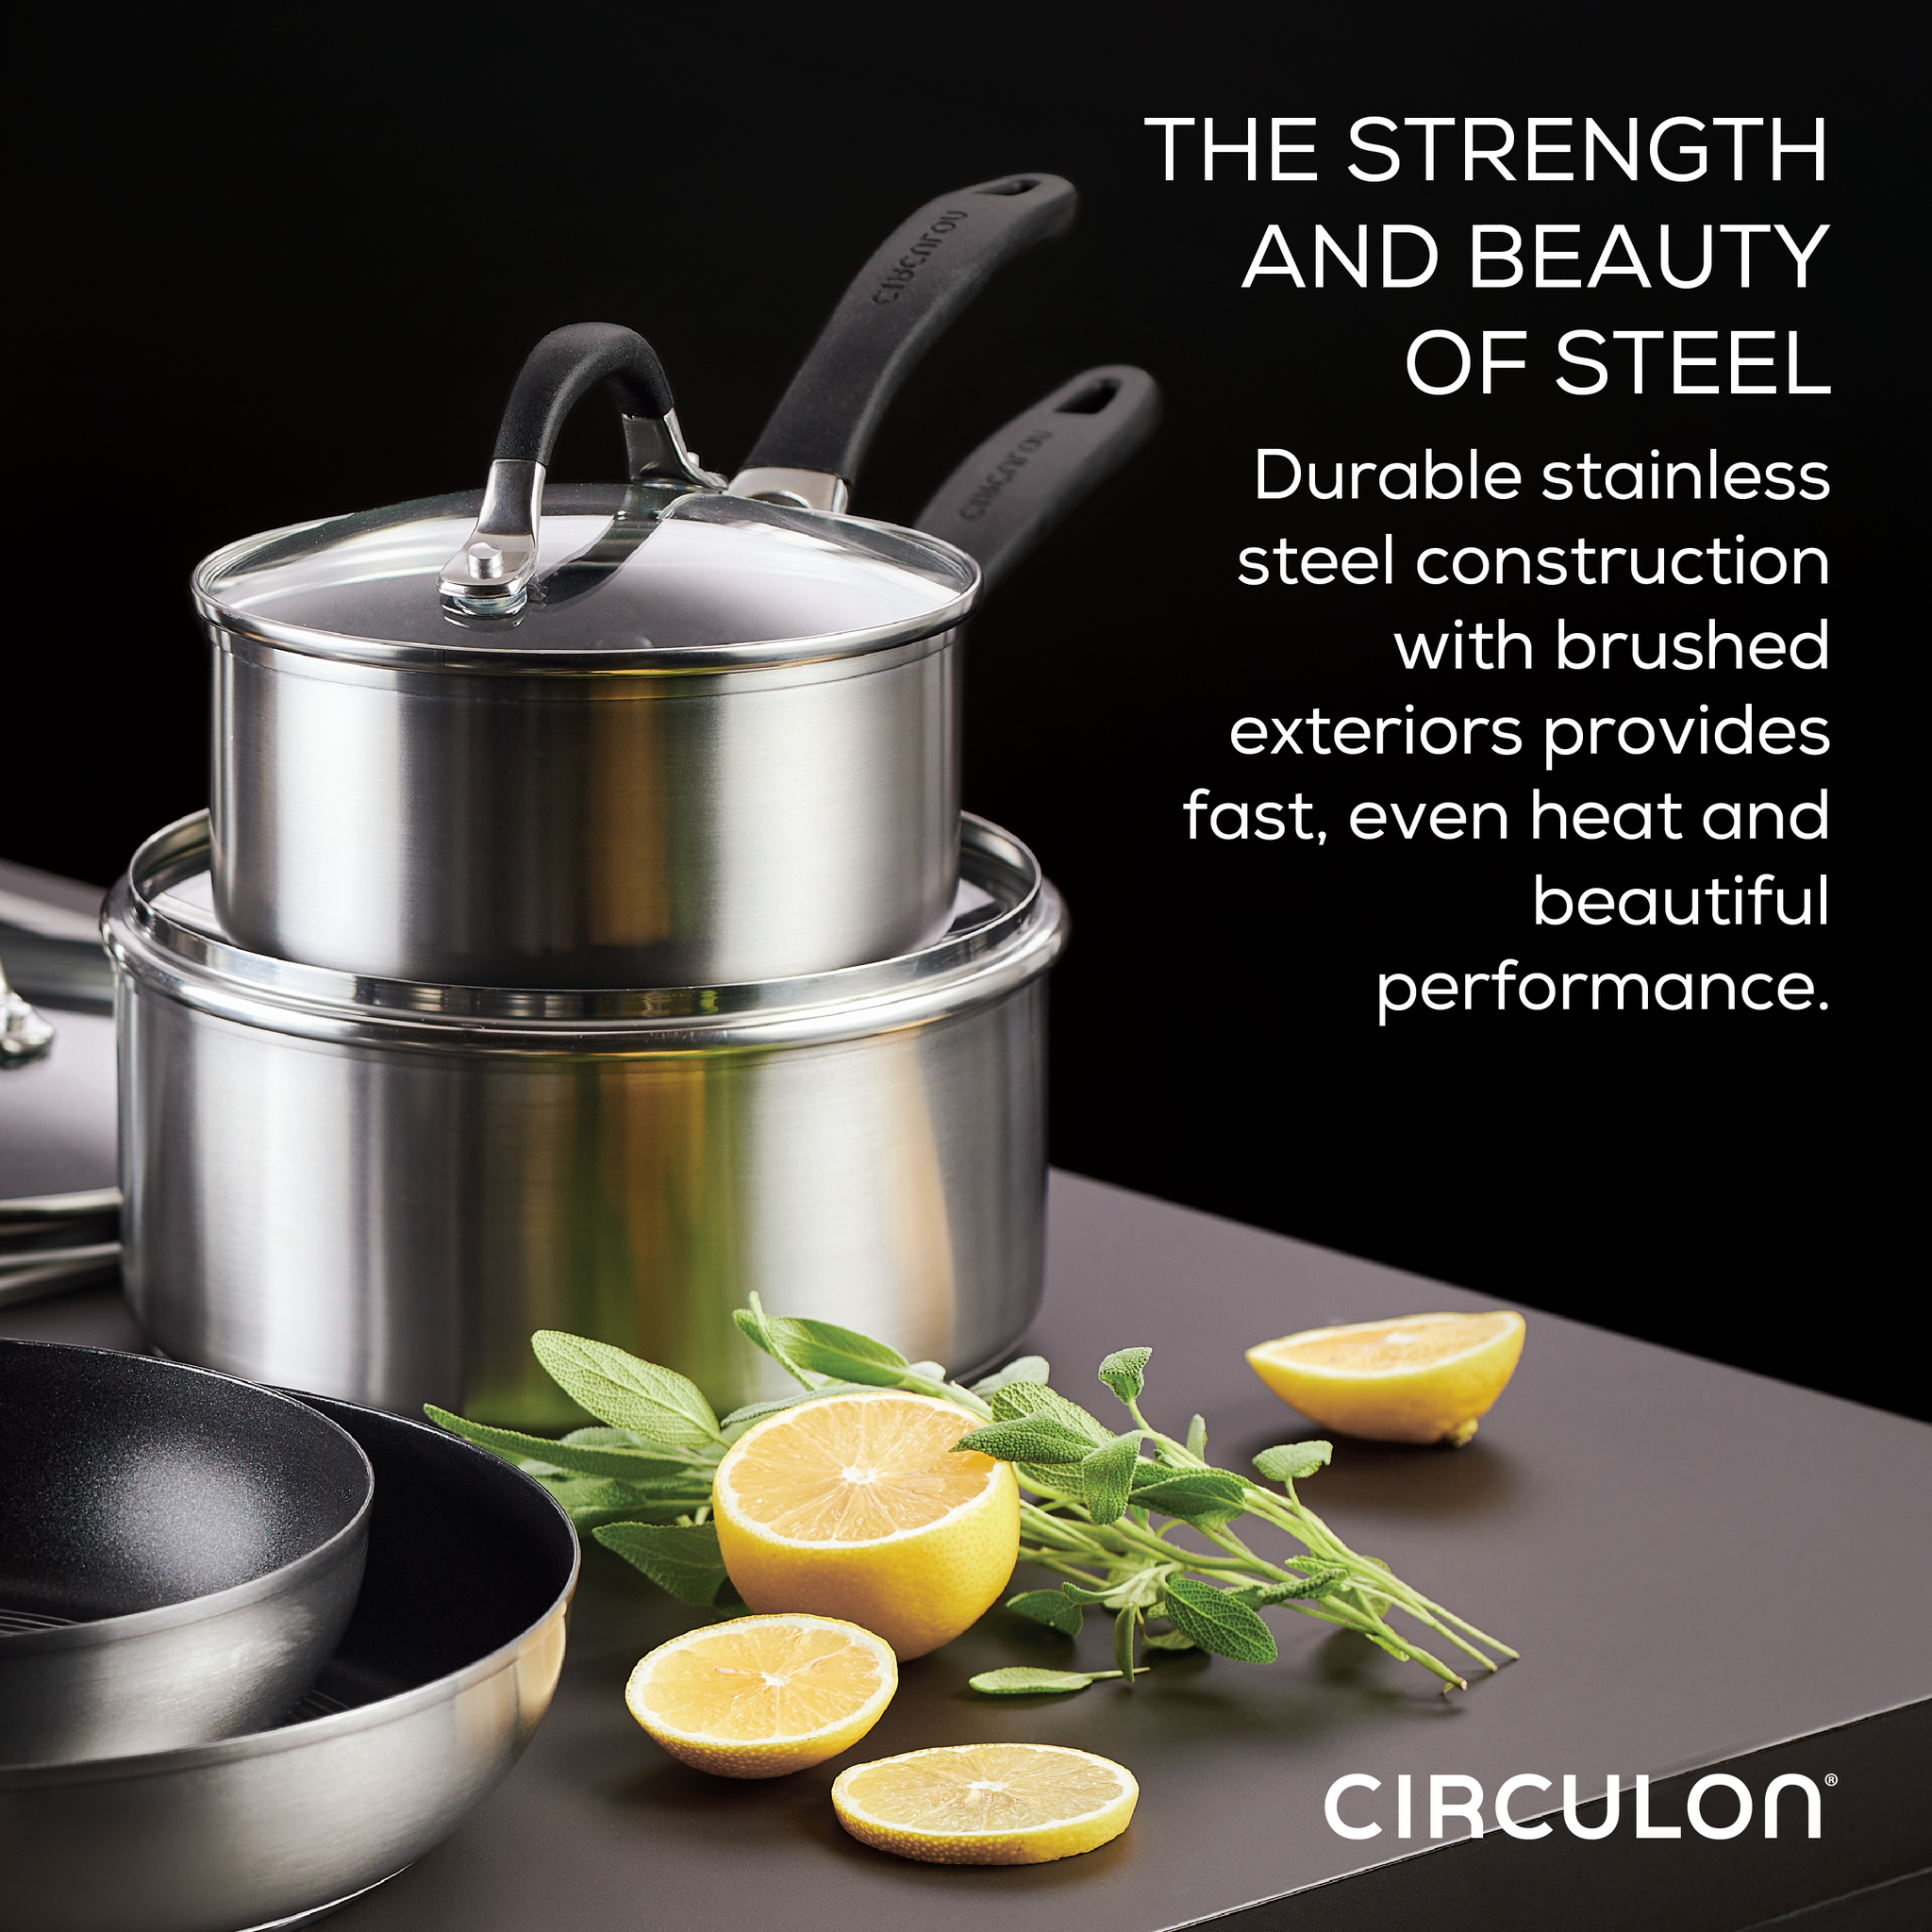 3-Quart Stainless Steel and Hybrid Nonstick Saute Pan with Lid – Circulon